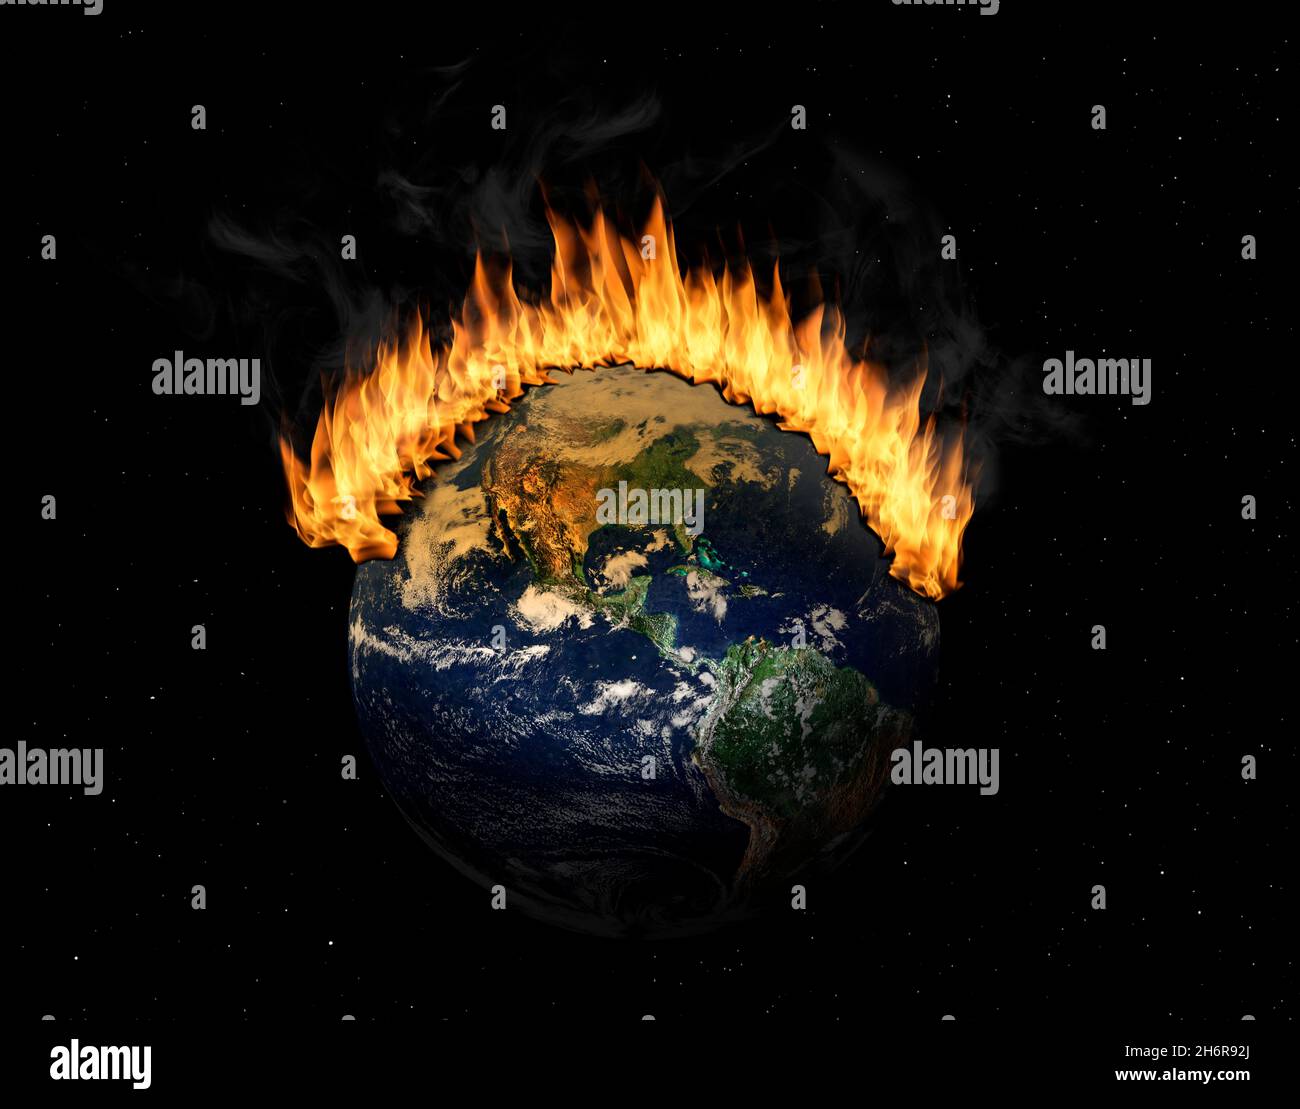 Planet earth in outer space engulfed in flames. Concept of climate crisis; natural disasters, global warming, apocalypse, war, judgment day. Elements Stock Photo